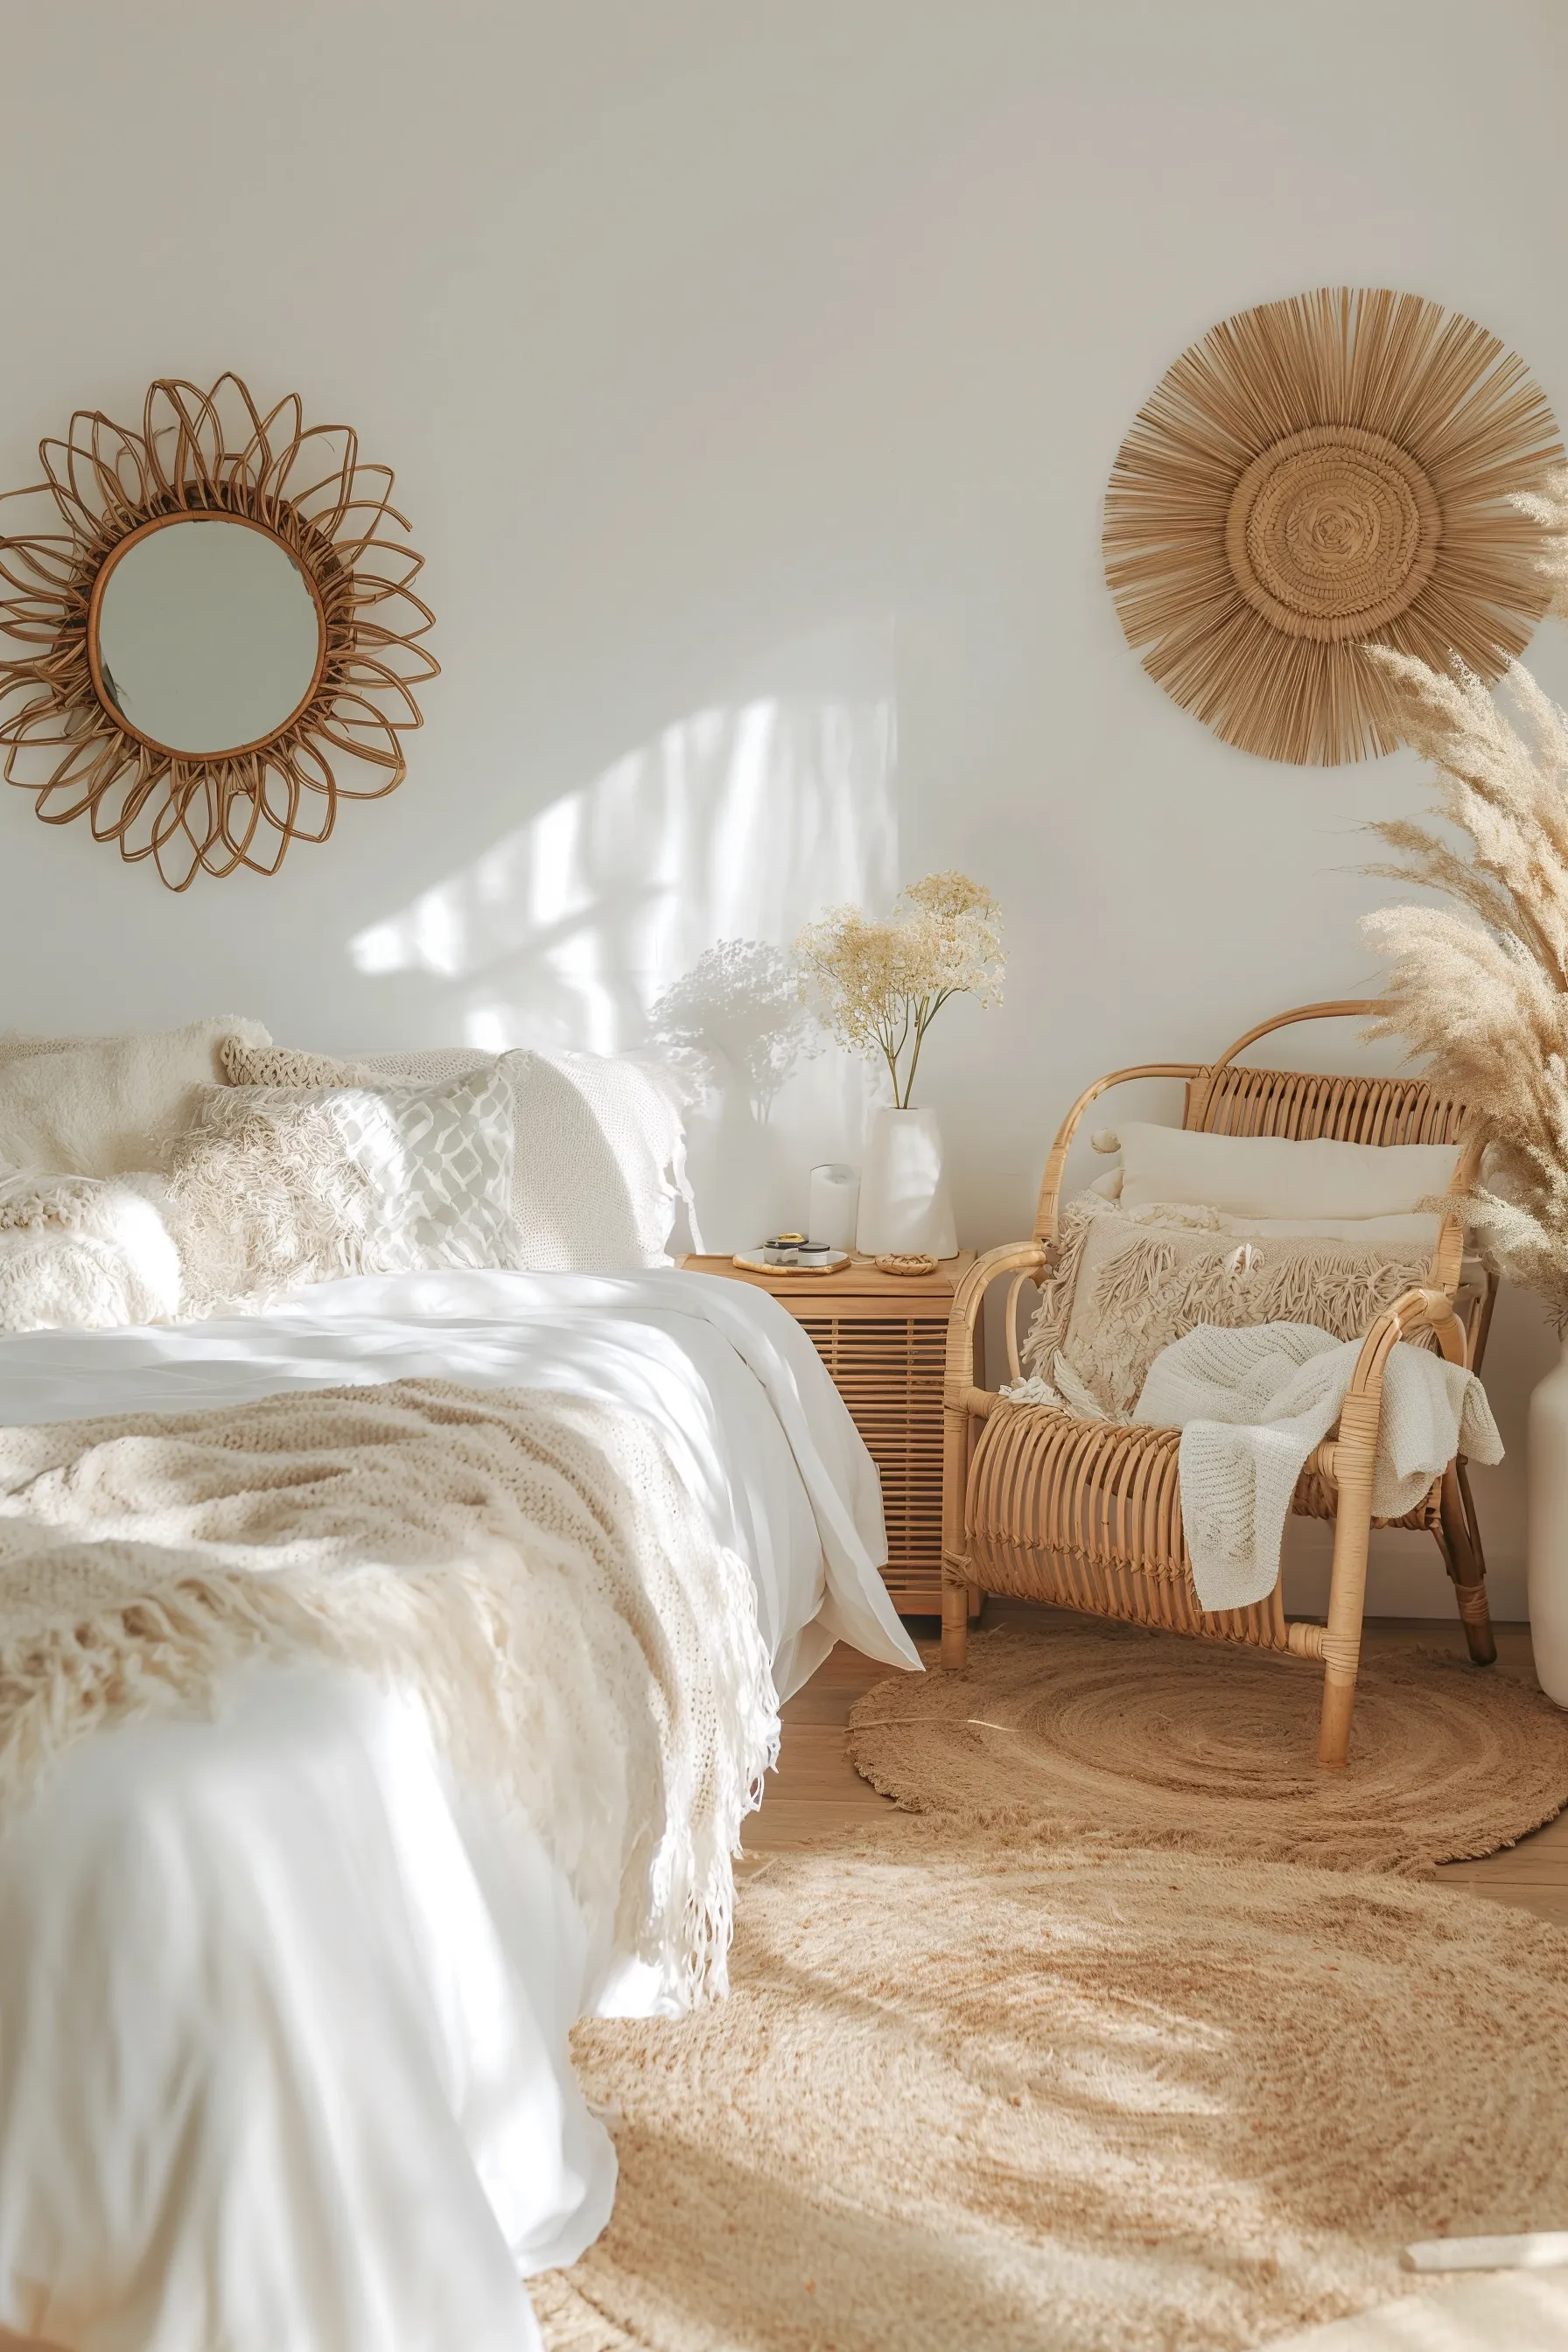 A white boho bedroom with rugs, a flower mirror, white duvet, pampas grass and boho bedding.